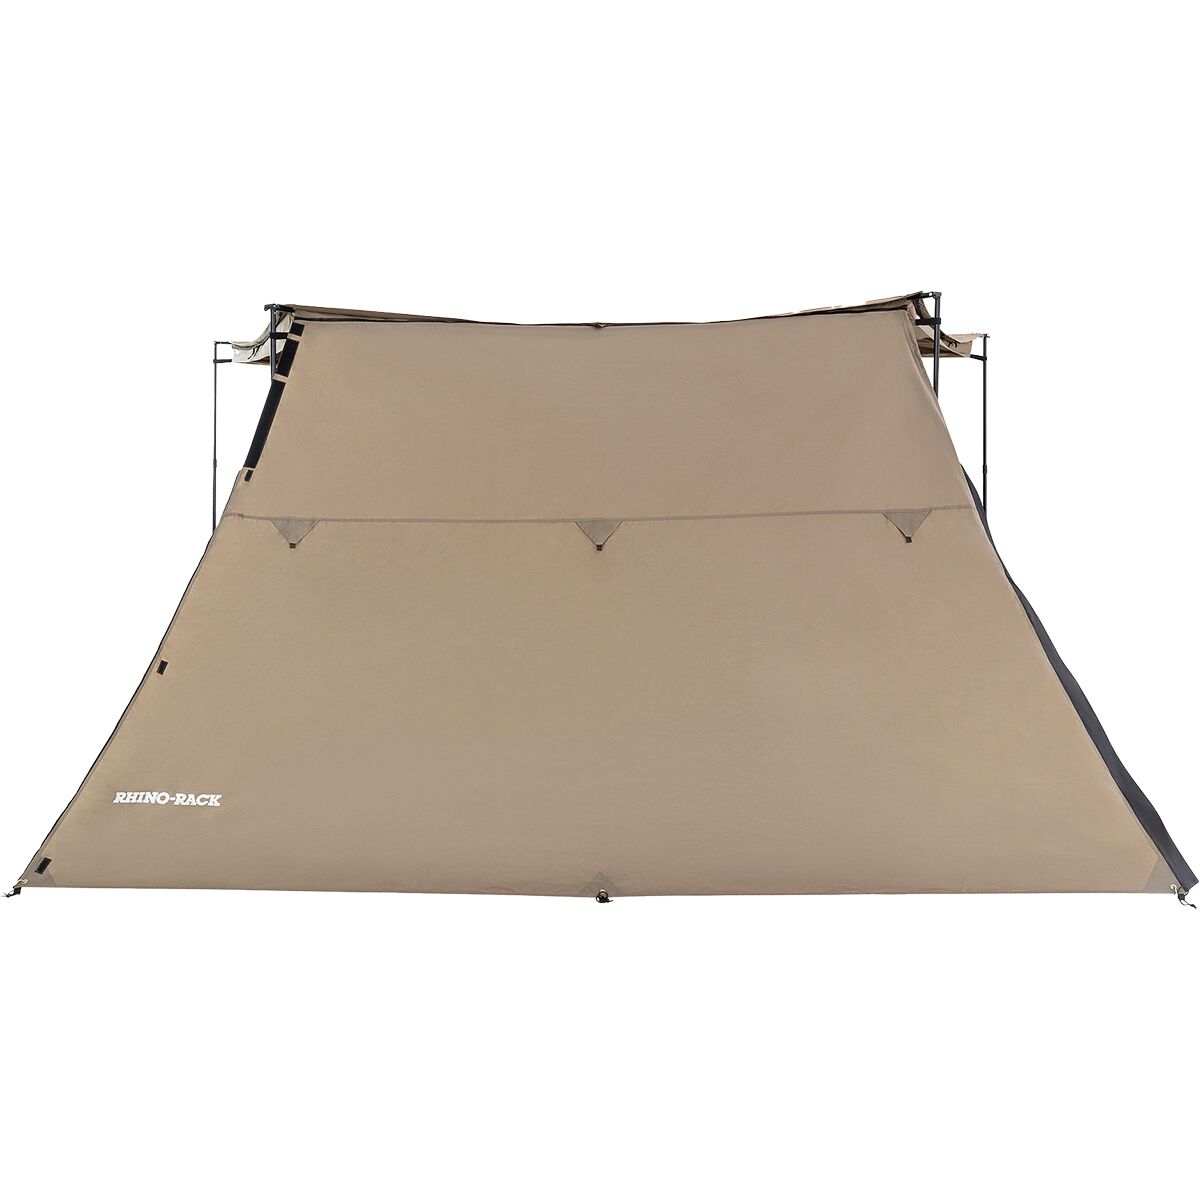 Rhino-Rack Batwing Tapered Awning Extension V2